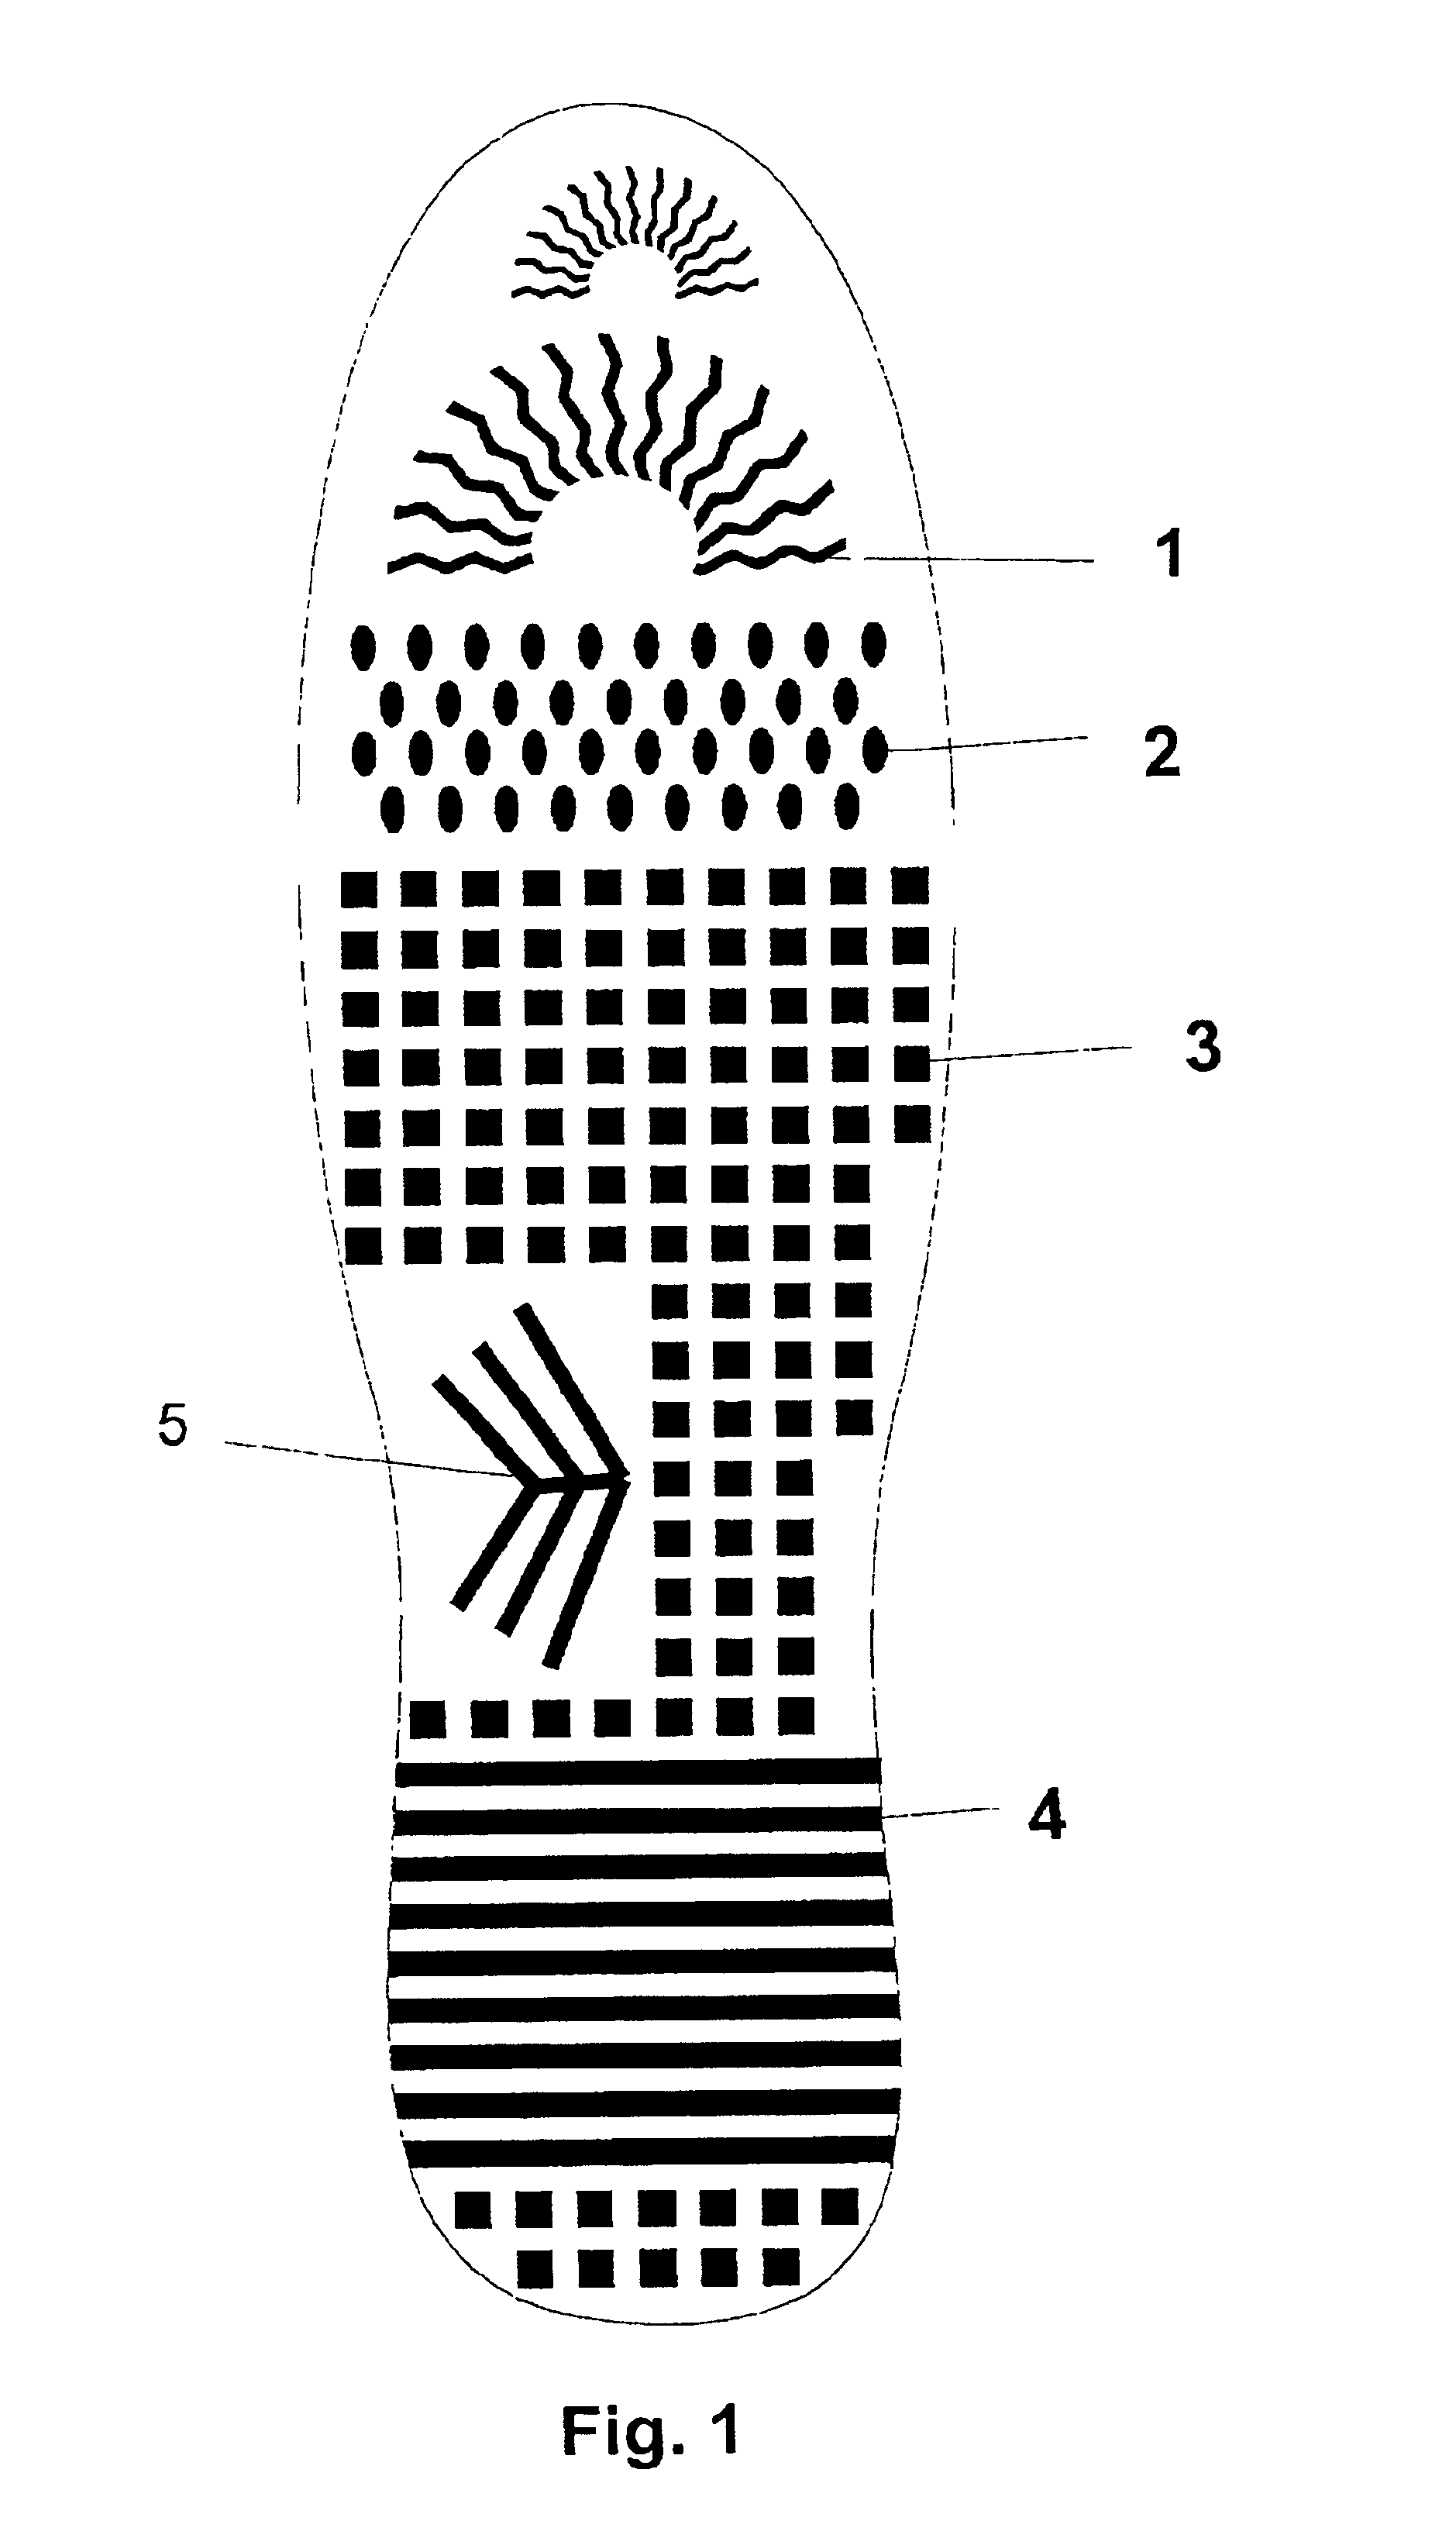 Cushions with non-intersecting-columnar elastomeric members exhibiting compression instability